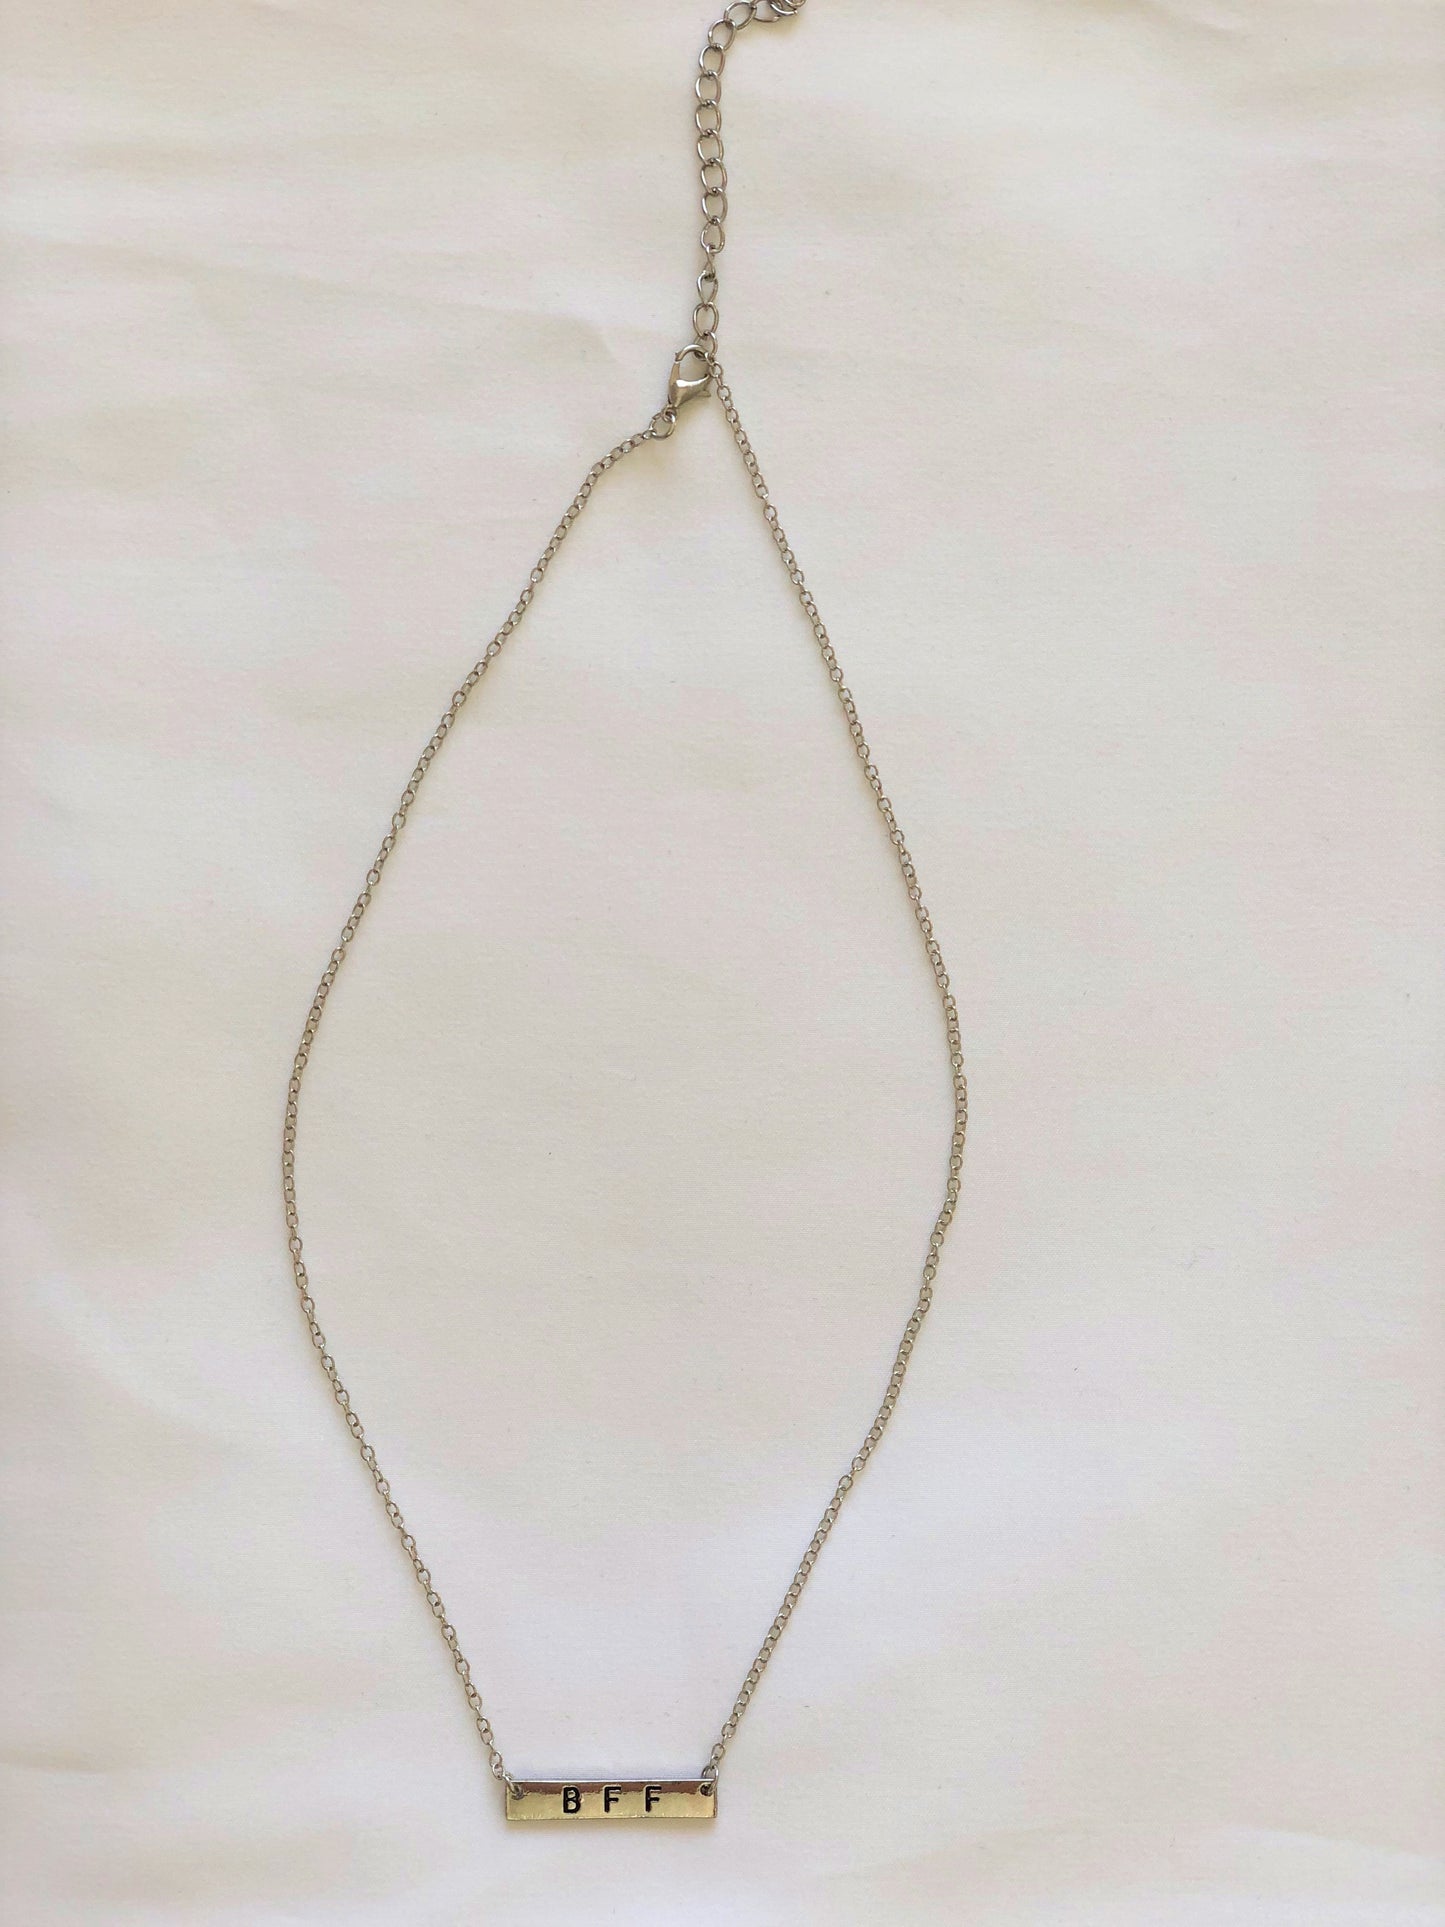 Silver "Bff" Chain Necklaces